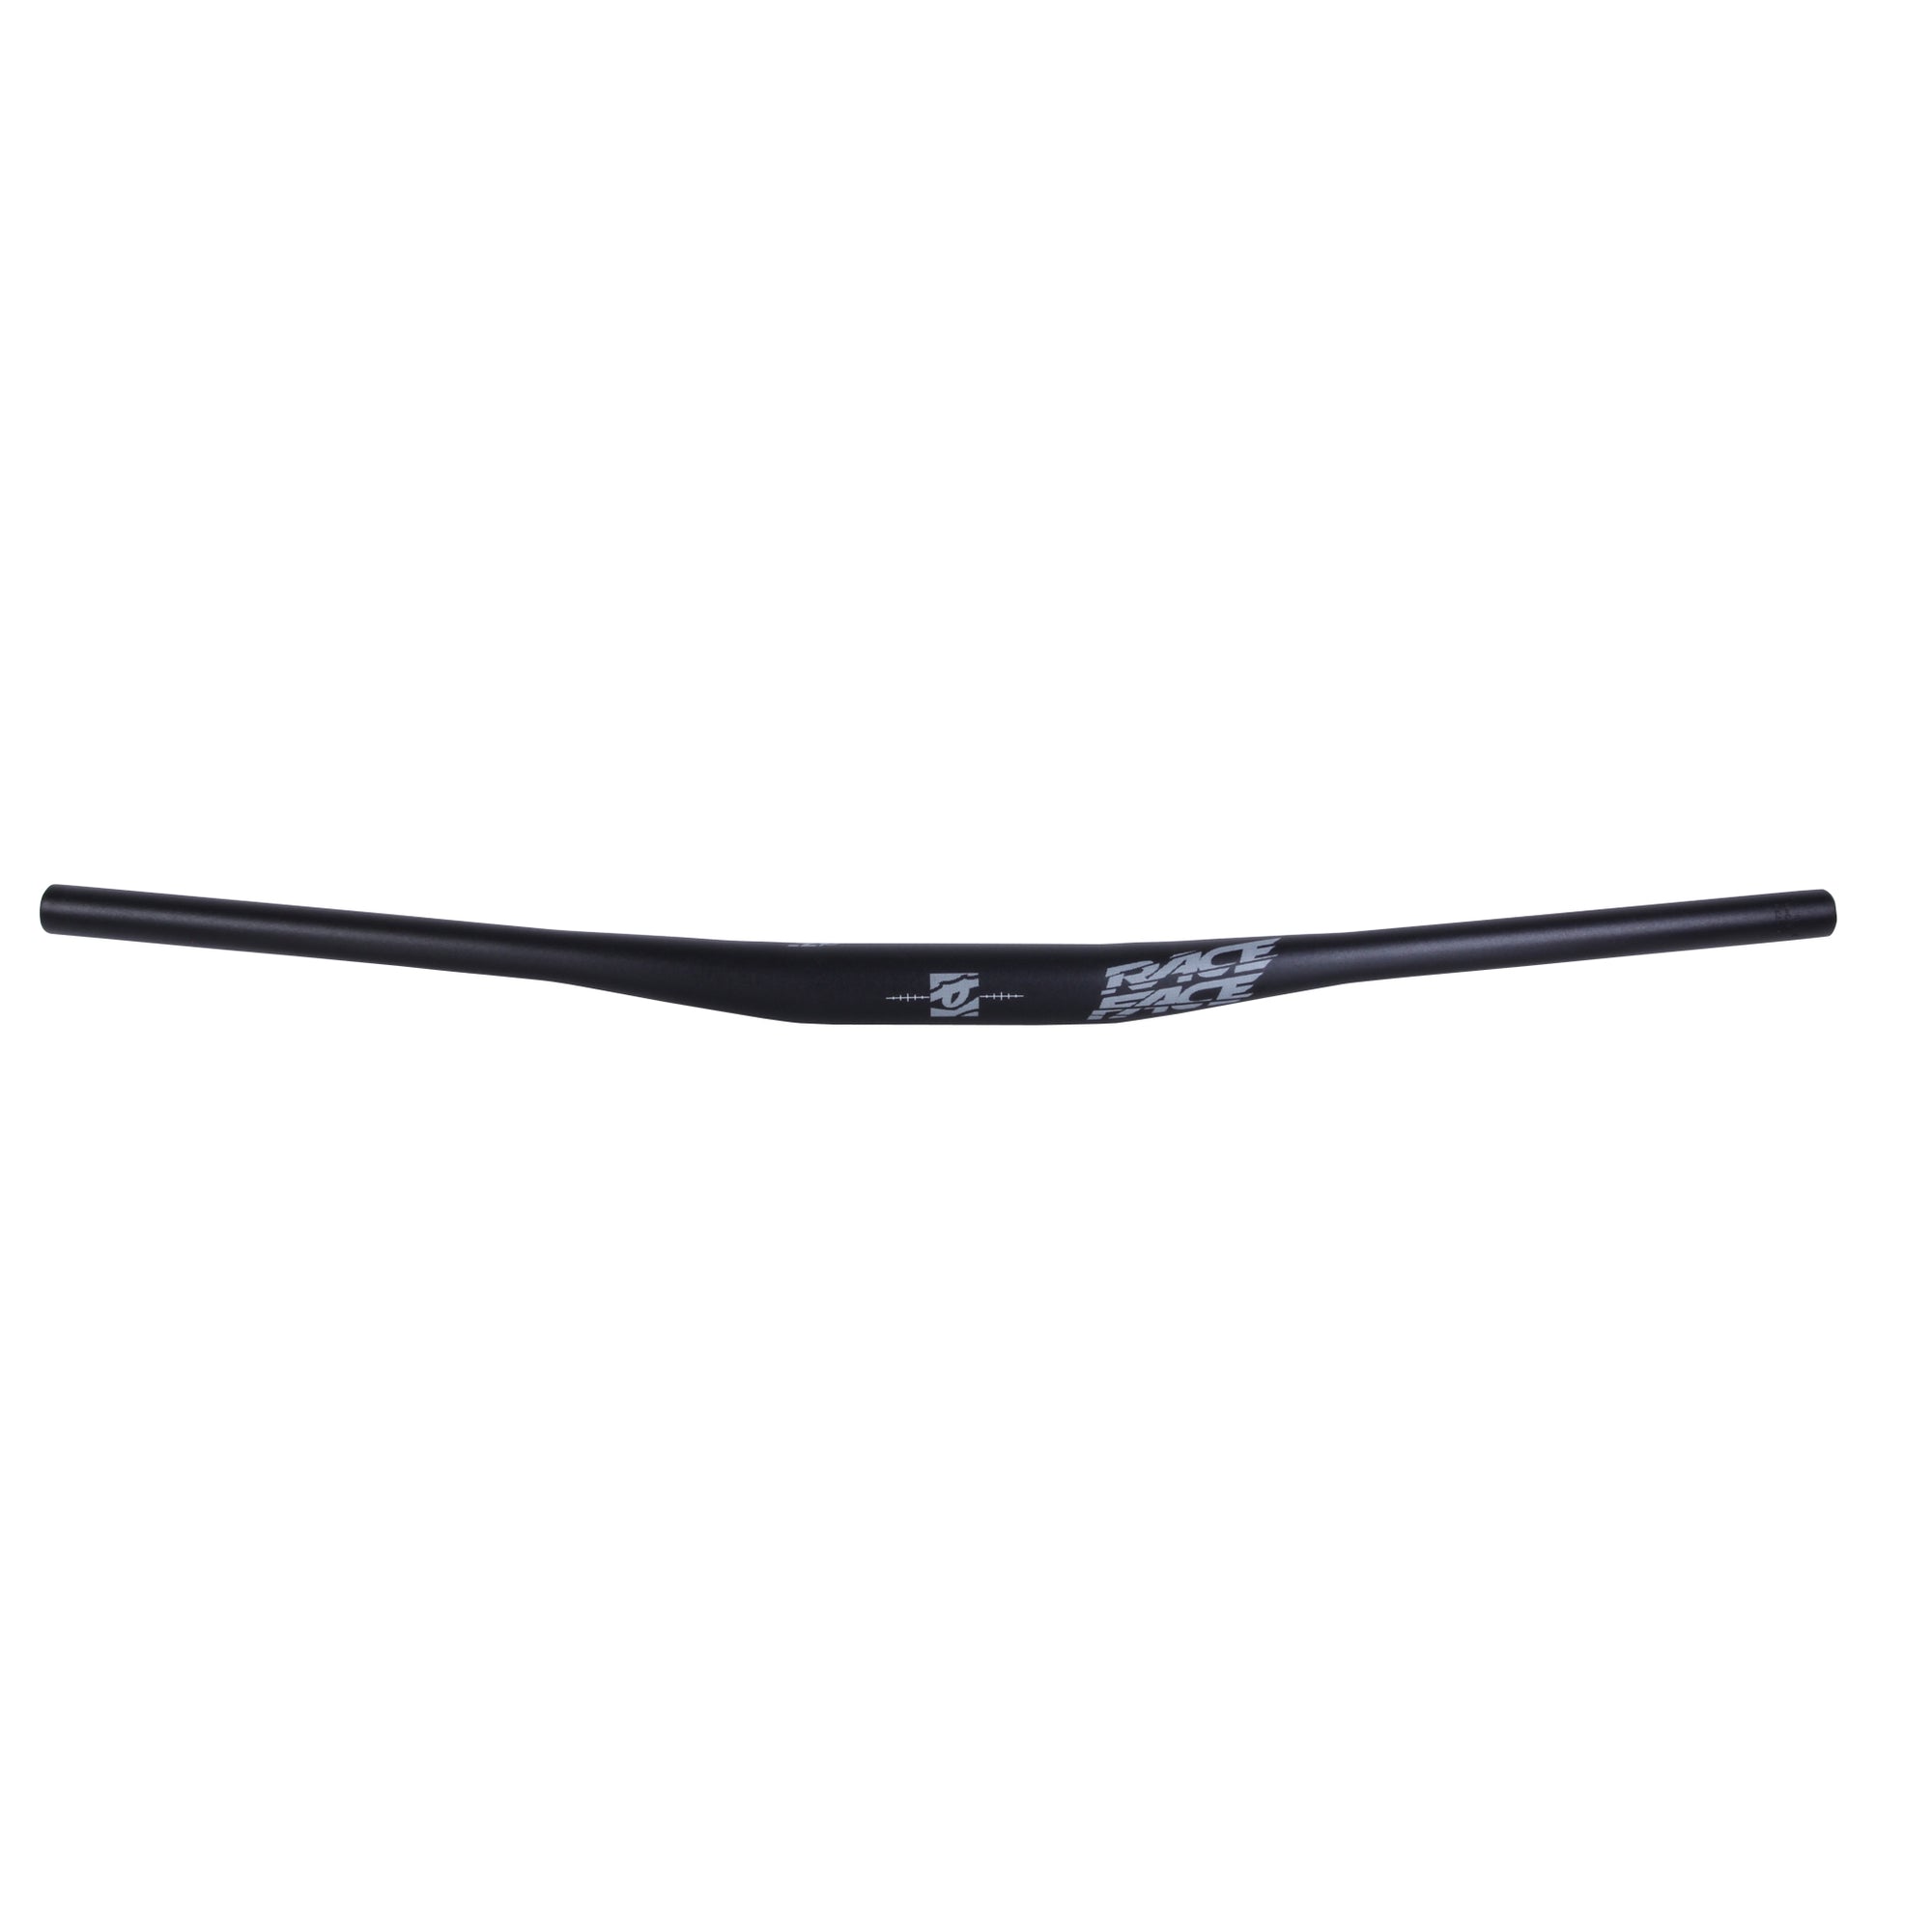 RaceFace Chester 35 Riser Handlebar: 35 x 780mm (10mm Rise) - Downtown Bicycle Works 